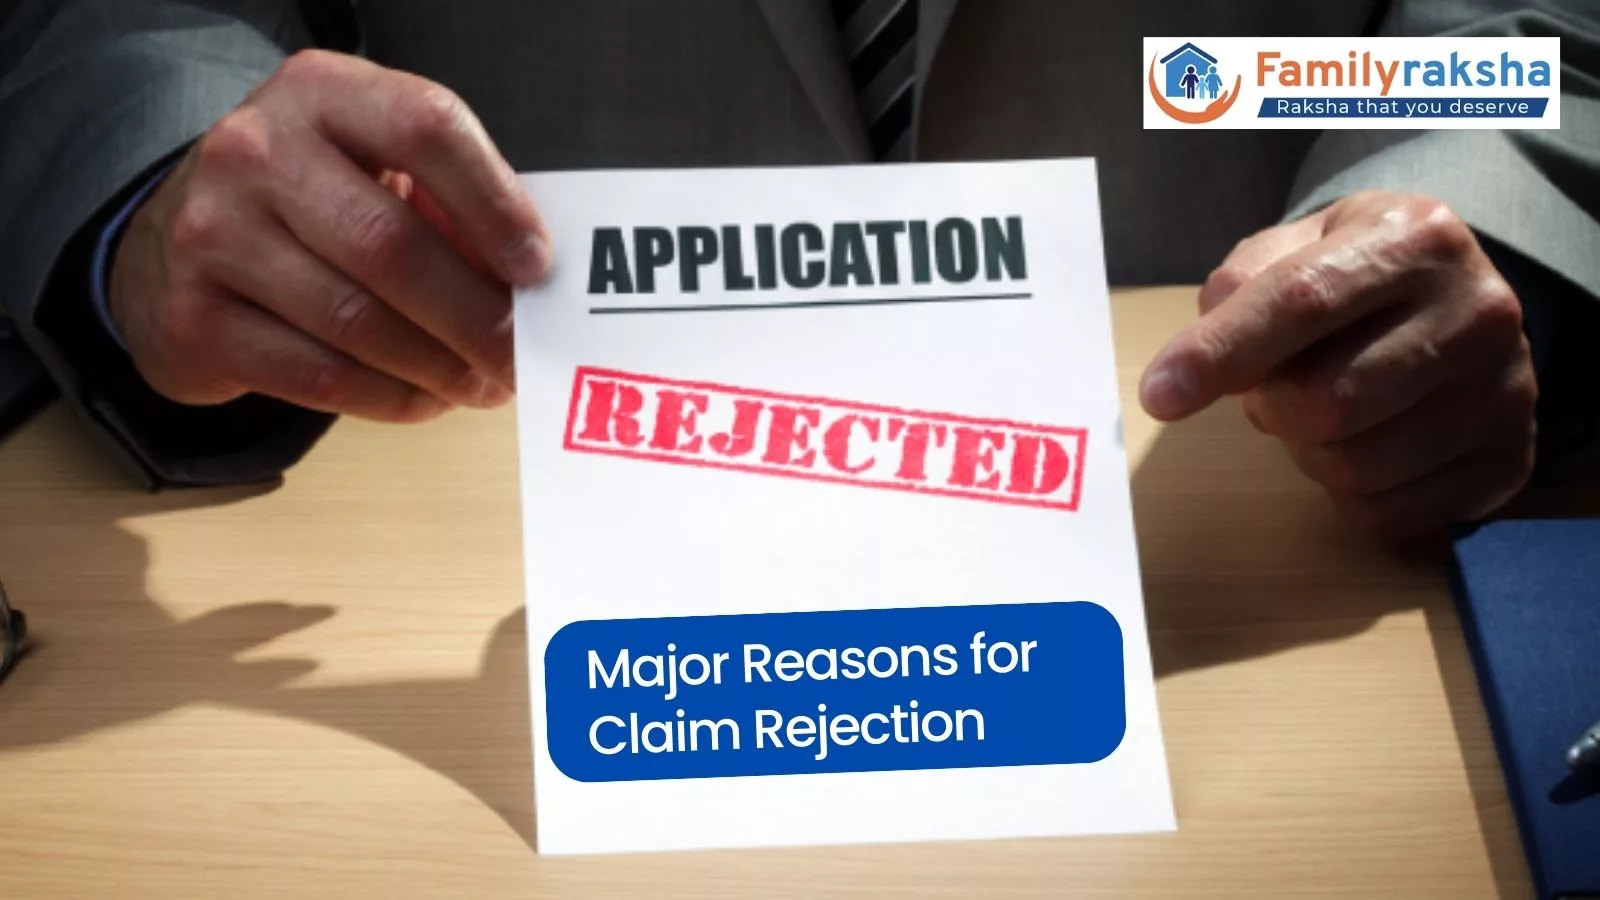 Major Reasons for Claim Rejection